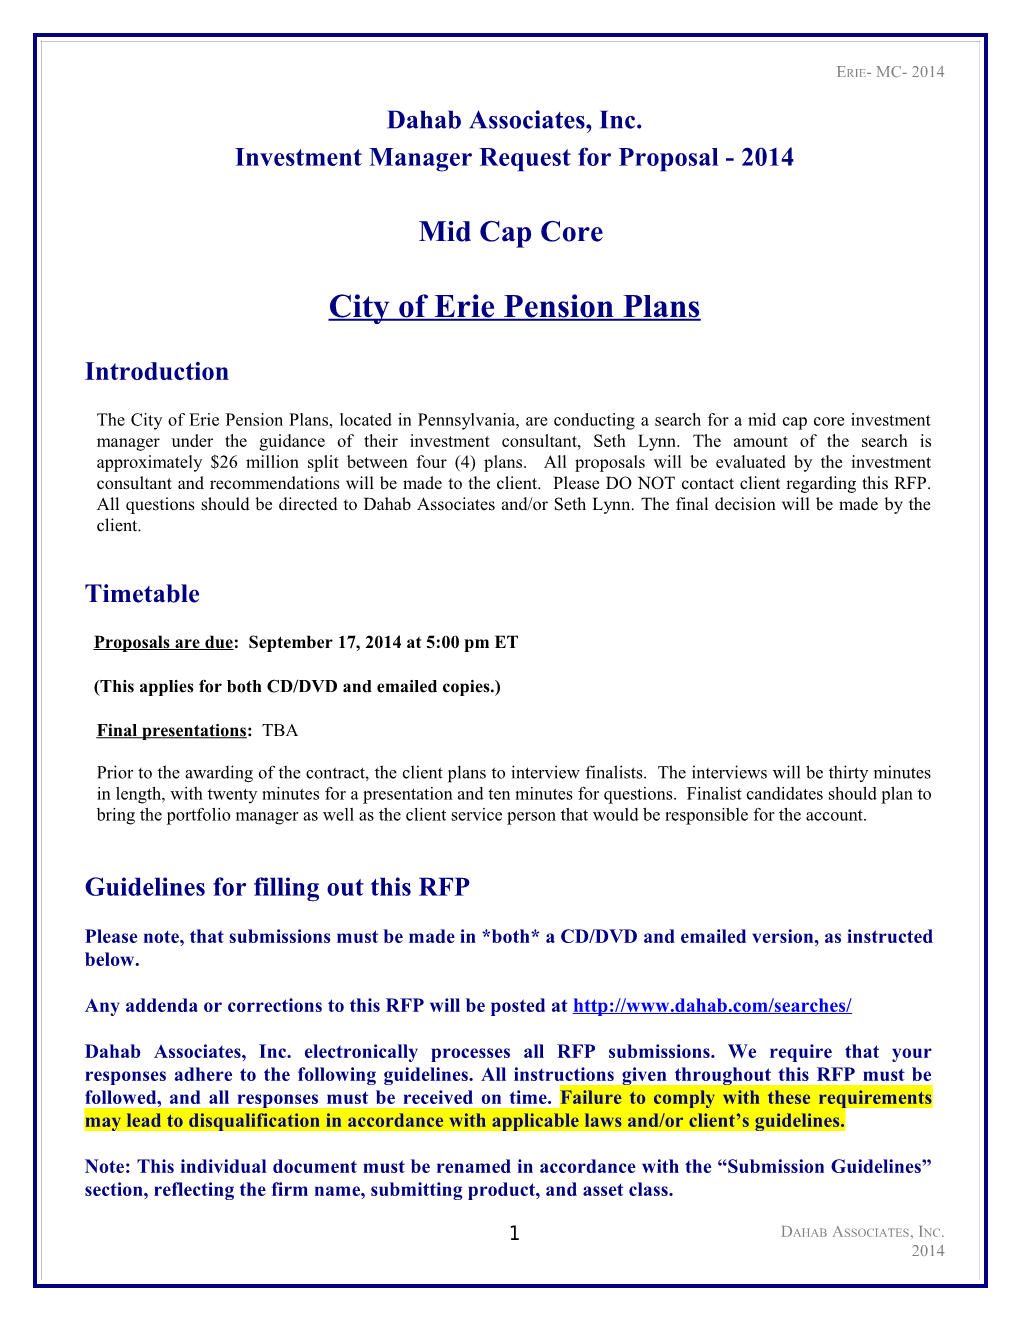 Investment Manager Request for Proposal - 2014